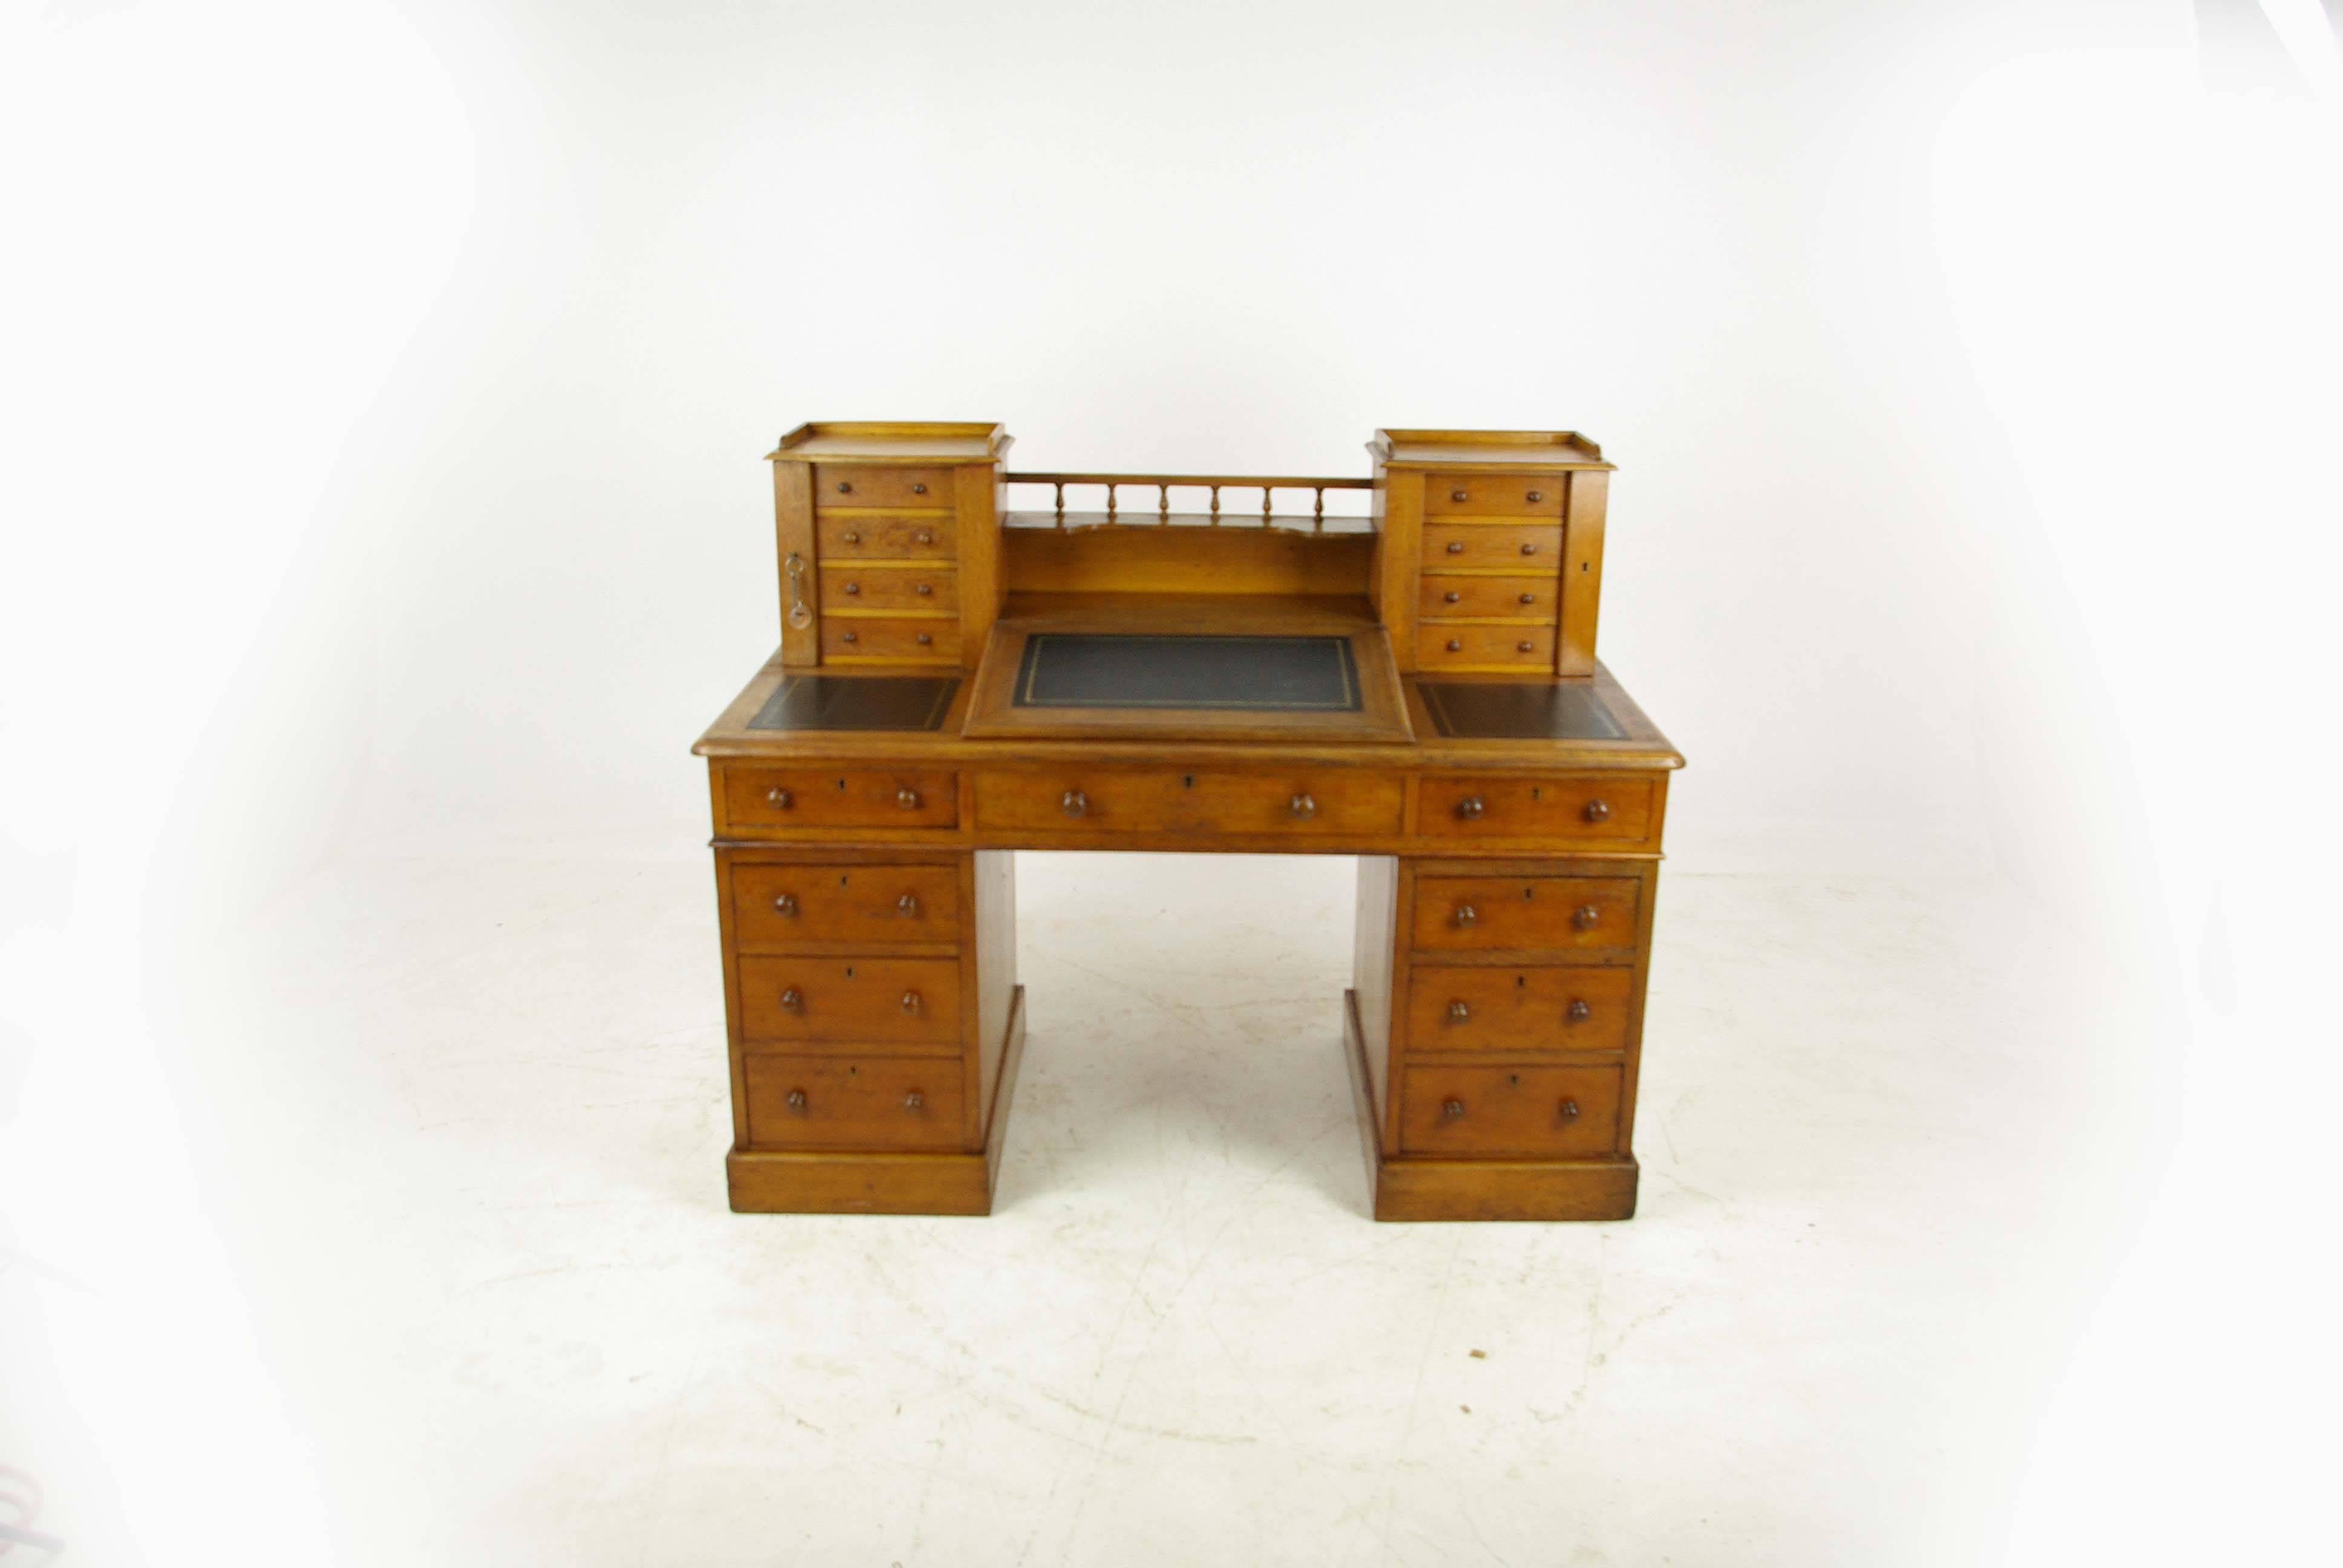 Antique oak desk, slant front desk, Dickens desk, England, 1880, Antique Furniture, B994.

England 1880,
Very nice example of a Victorian Oak Dickens Desk
Top with central spindled gallery
Flanked by two flights of four small drawers
Secured with